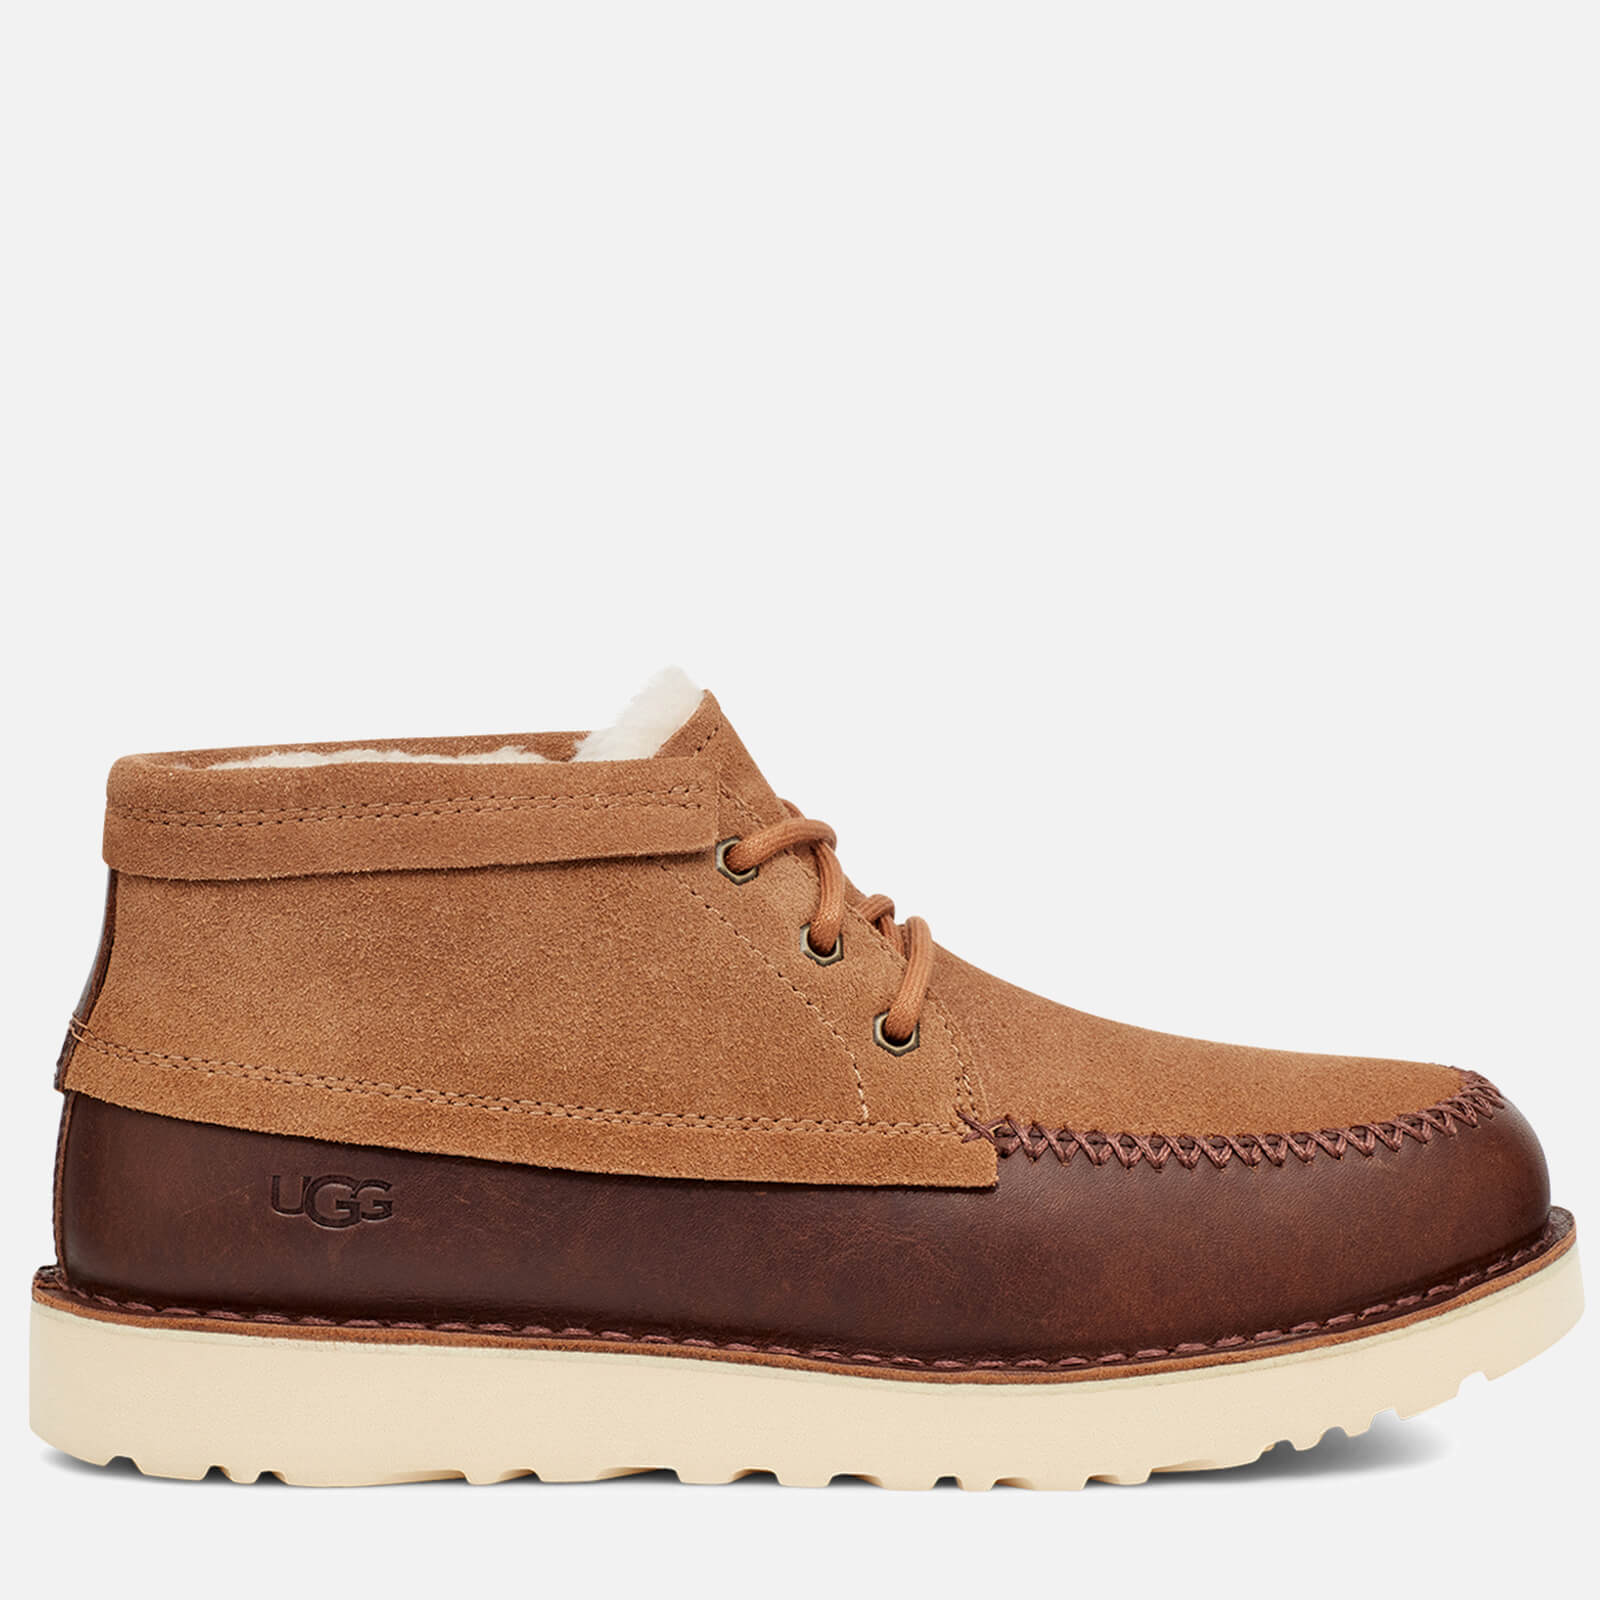 UGG Men's Campout Suede Chukka Boots - Chestnut - UK 8